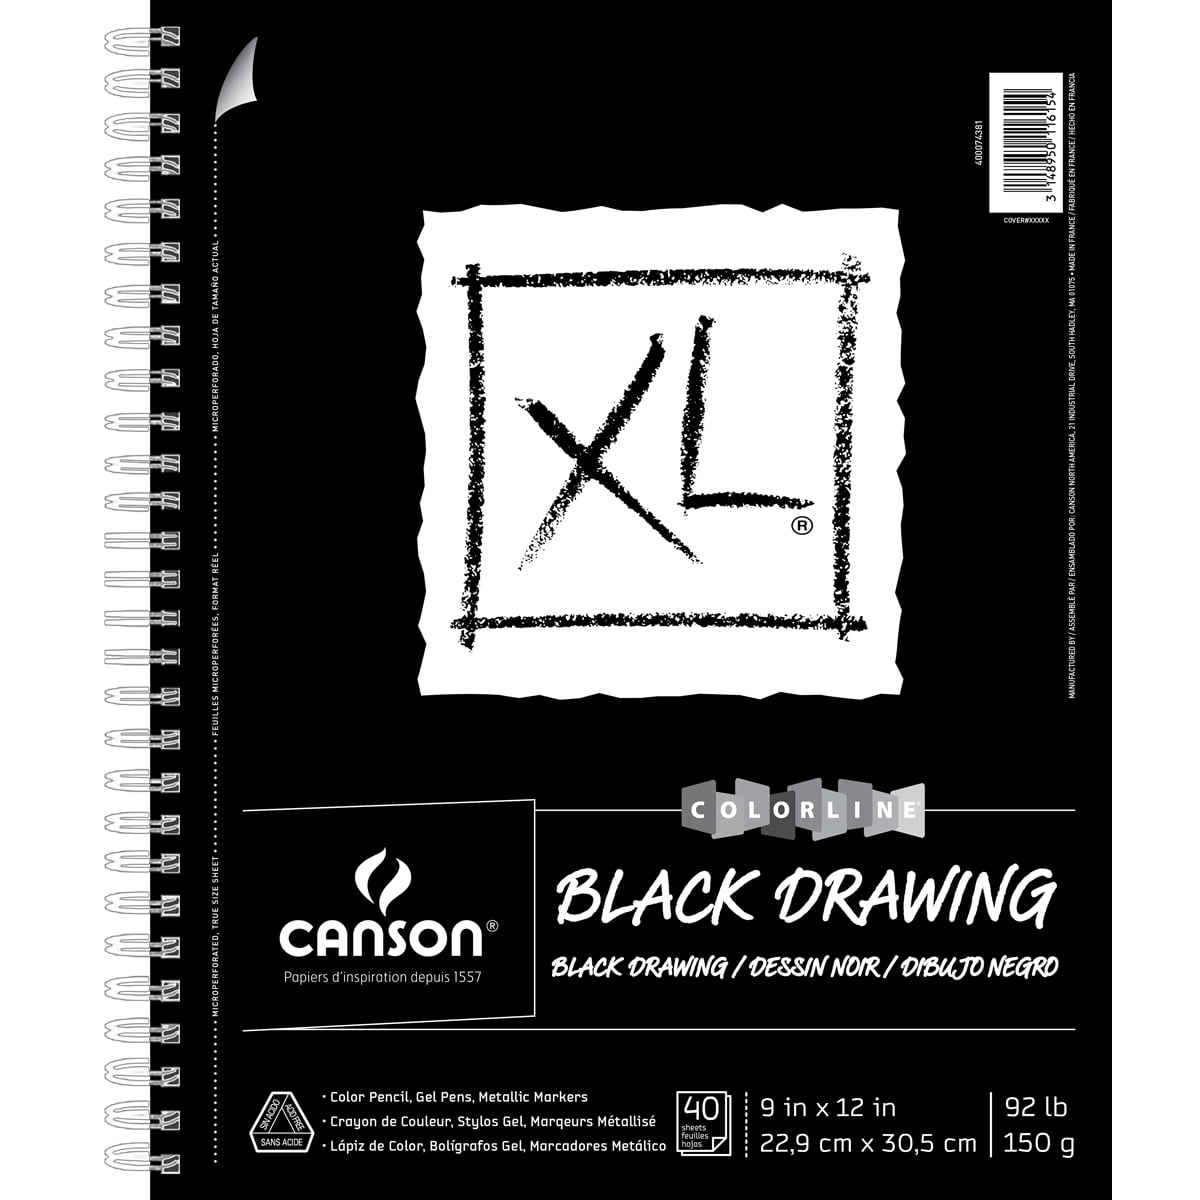 CANSON XL Series Creative Painting Book 16K/8K/A4/A3 Sketch/Marker/Acrylic/ Watercolor/Pencil/Toner Stick Book Kraft Paper Book